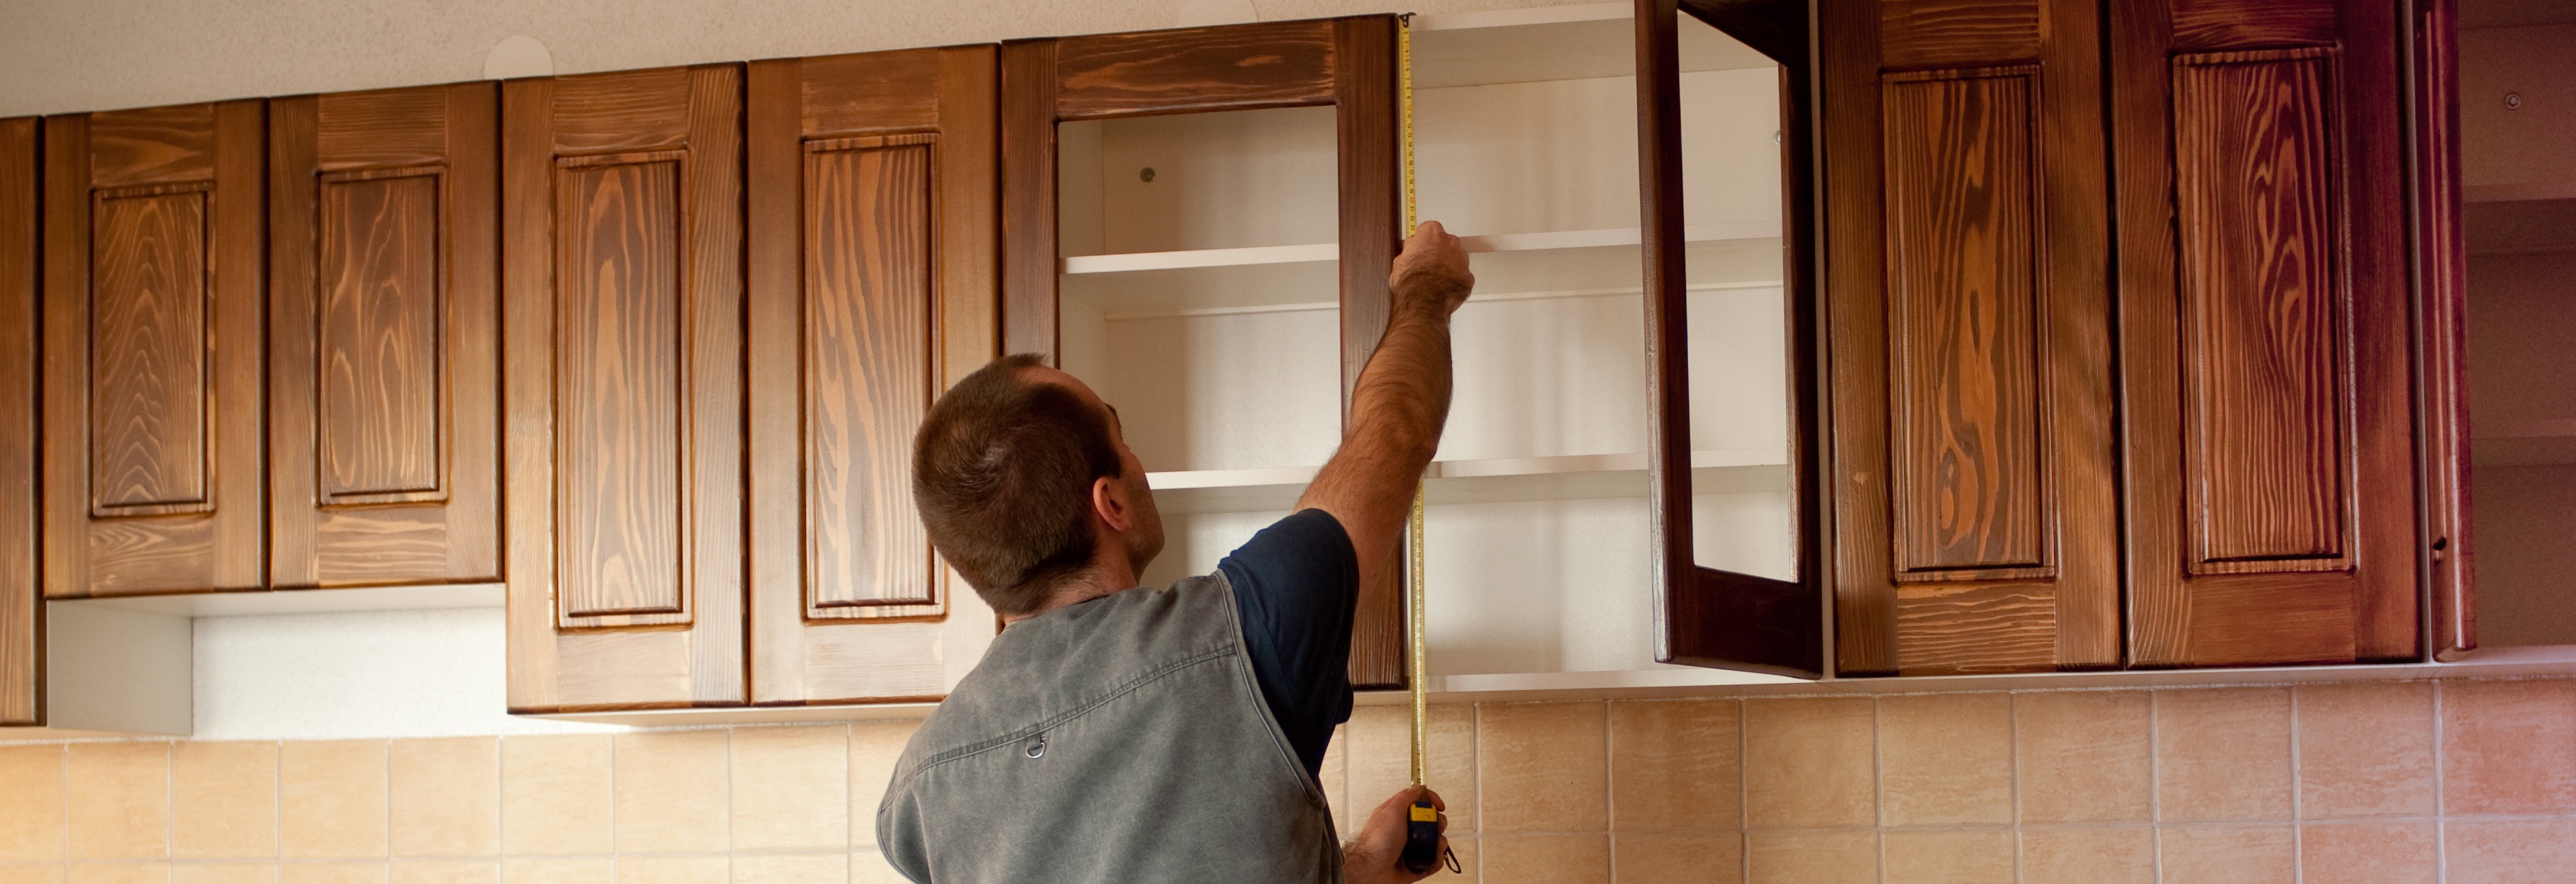 Installing new kitchen cabinets in Hanover, PA